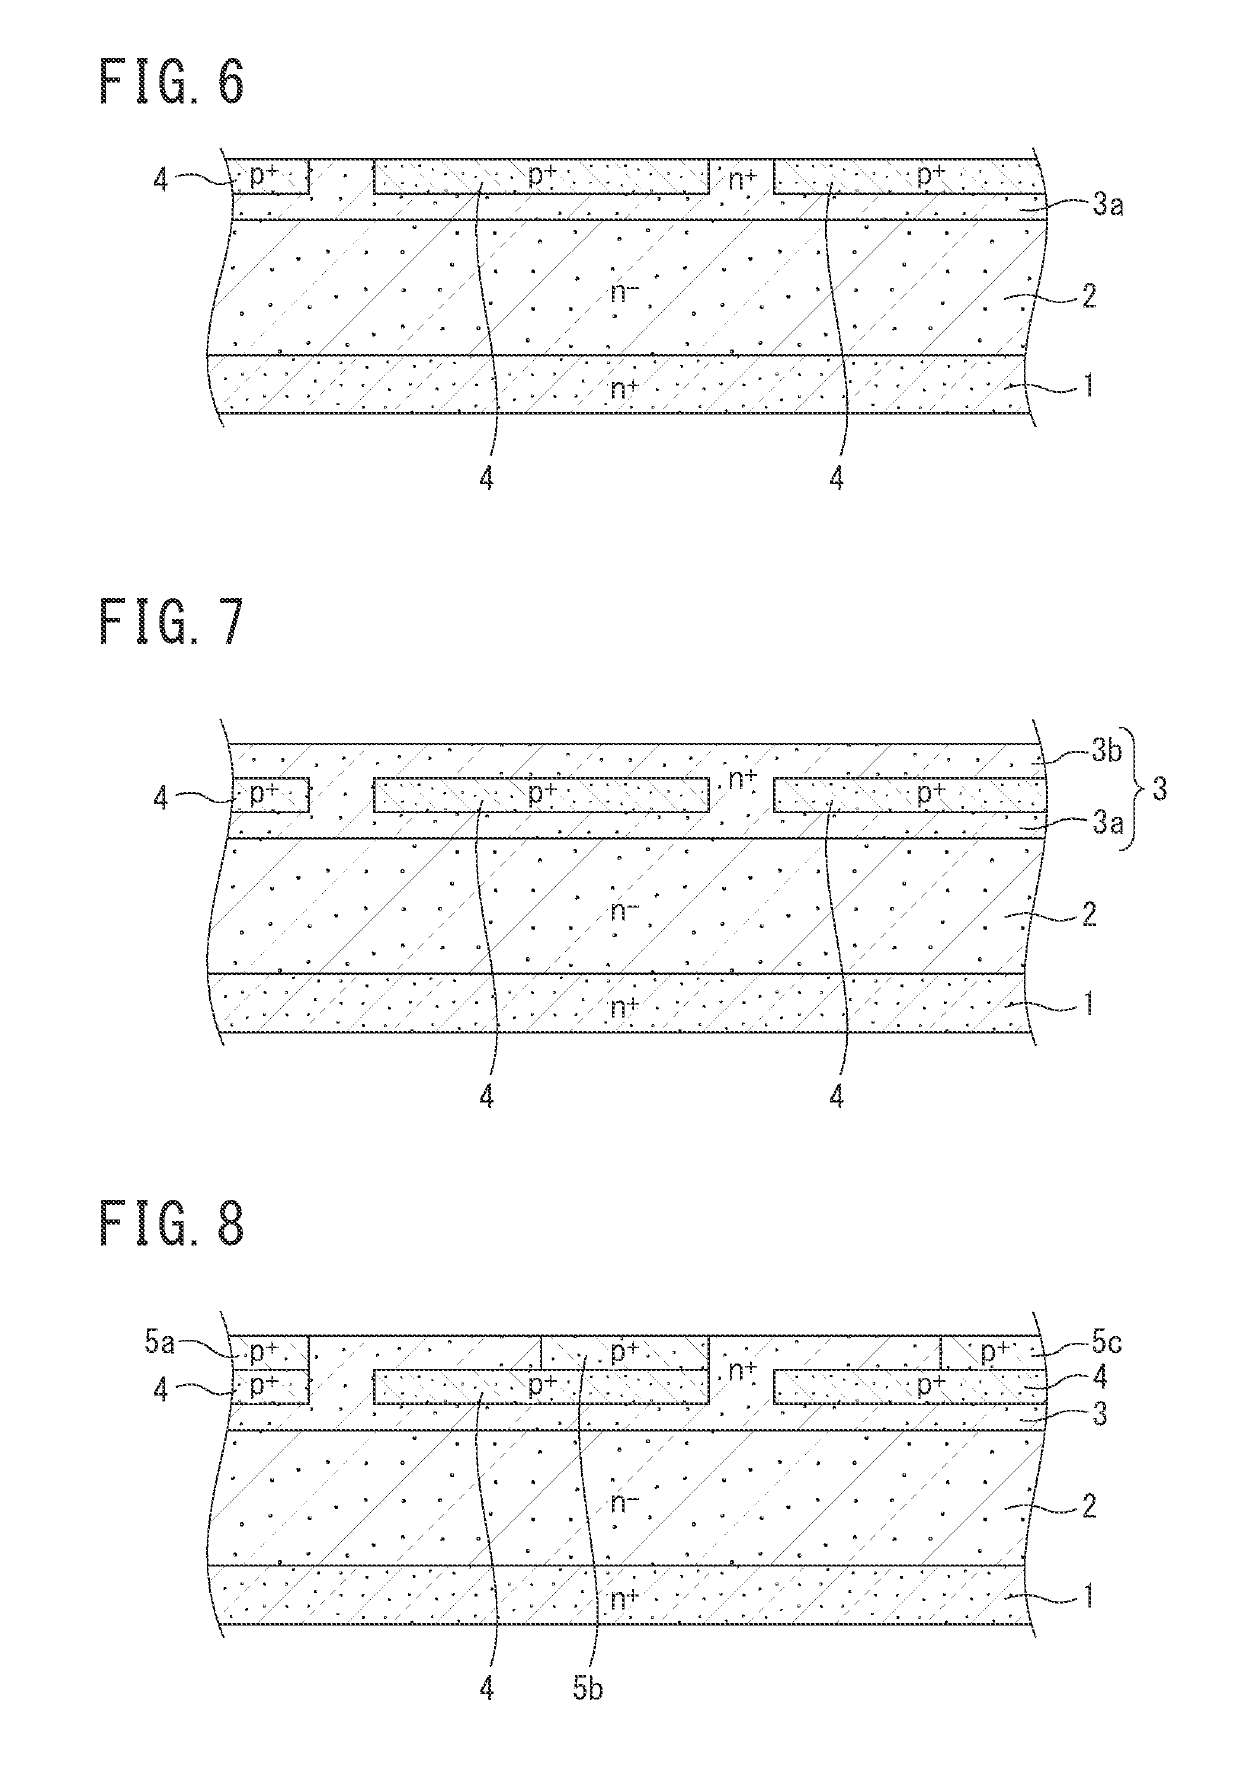 Insulated-gate semiconductor device and method of manufacturing the same